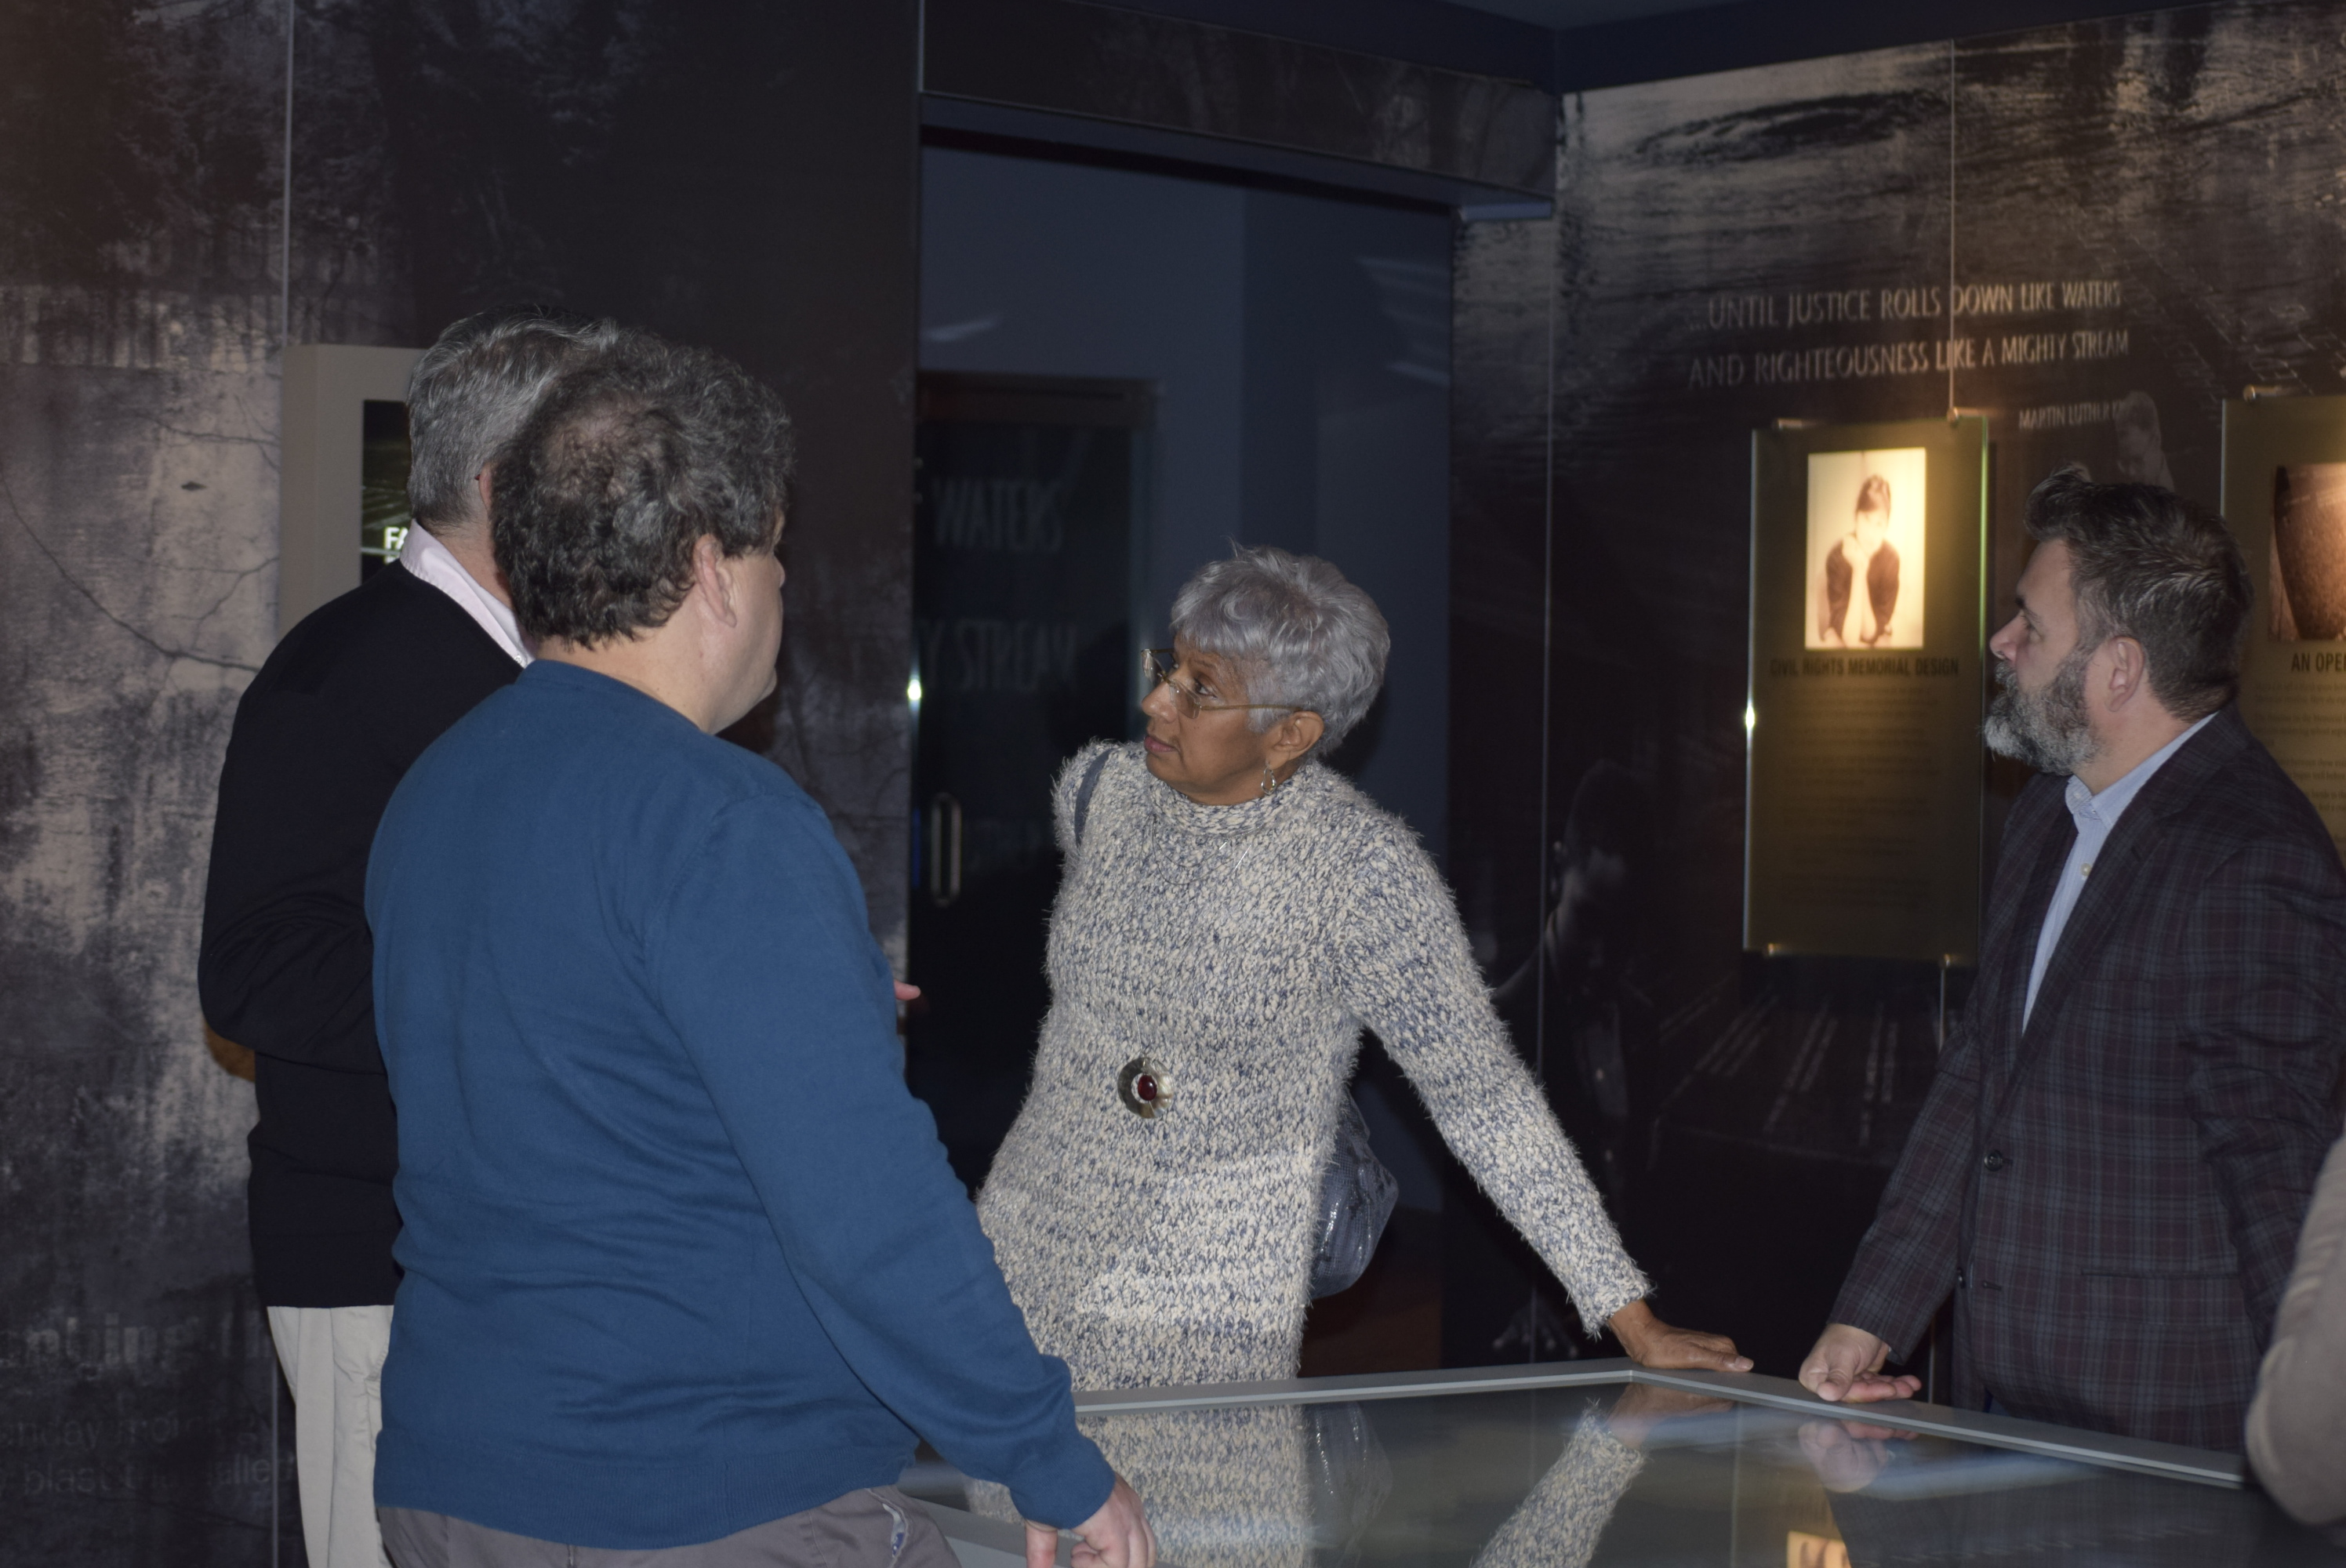 Members of TMG during a short tour of the exhibitions at the Civil Rights Memorial Center.